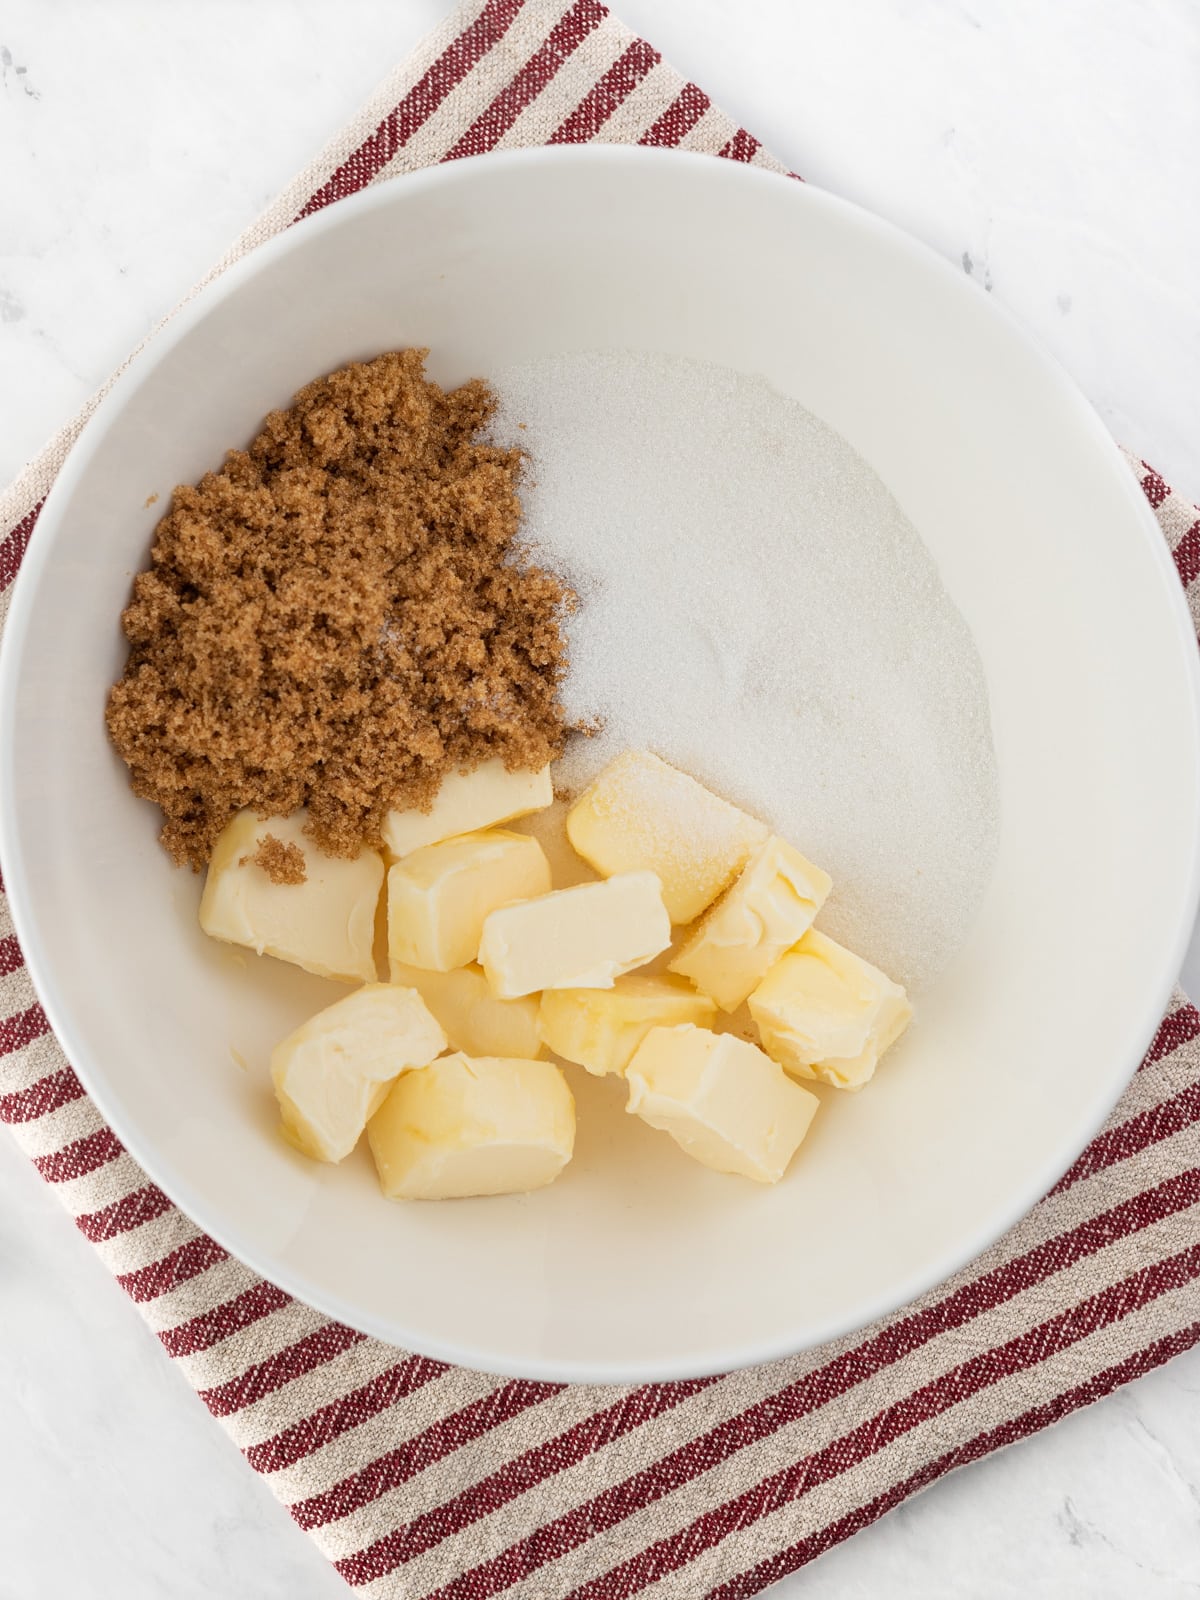 Vegan butter, brown sugar and white sugar in a mixing bowl.